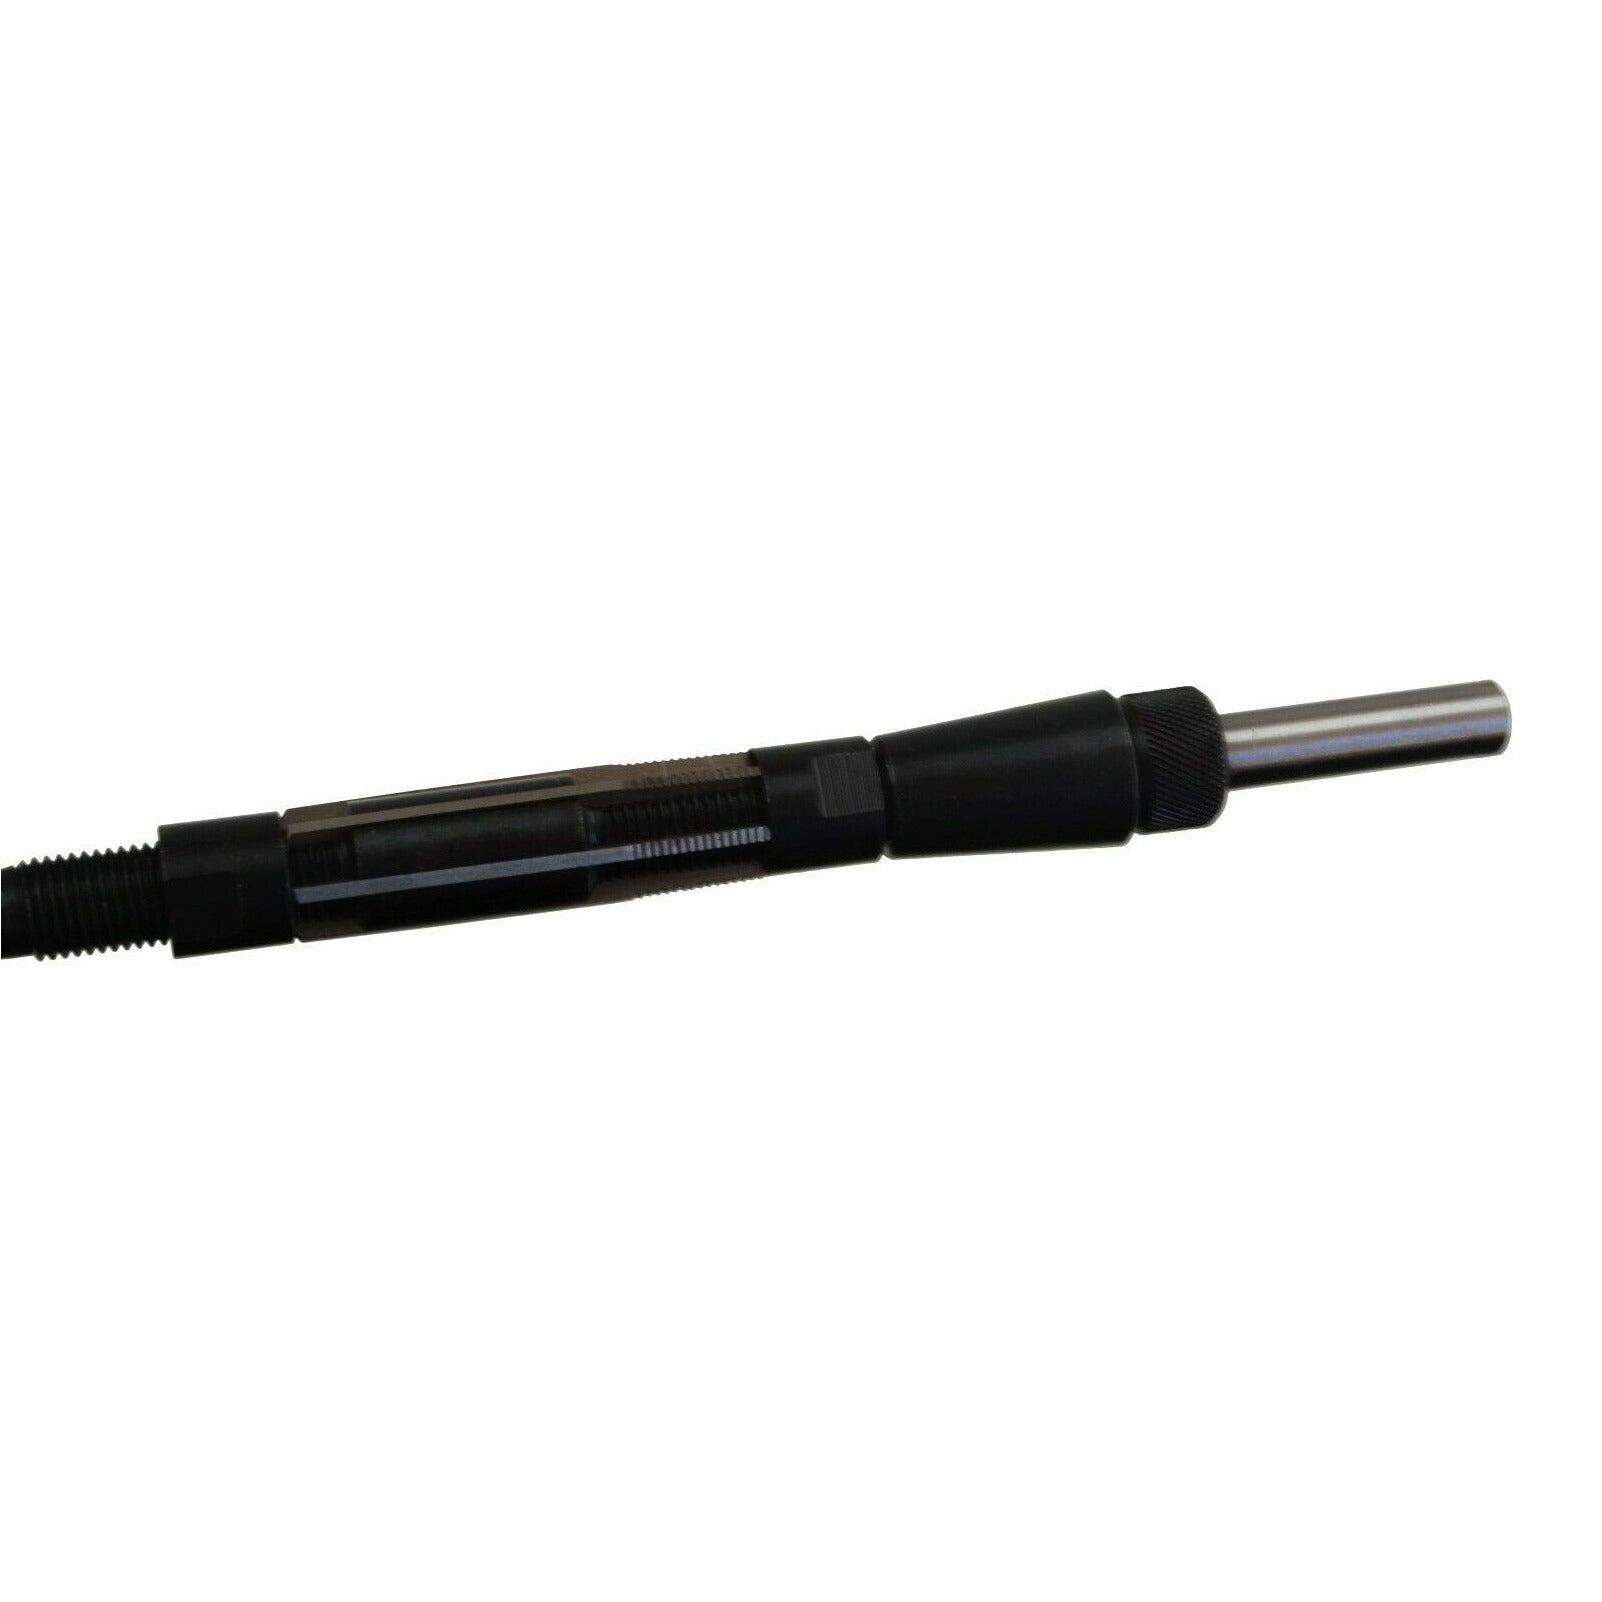 12 -13.5 mm Adjustable Hand Reamer with Guide